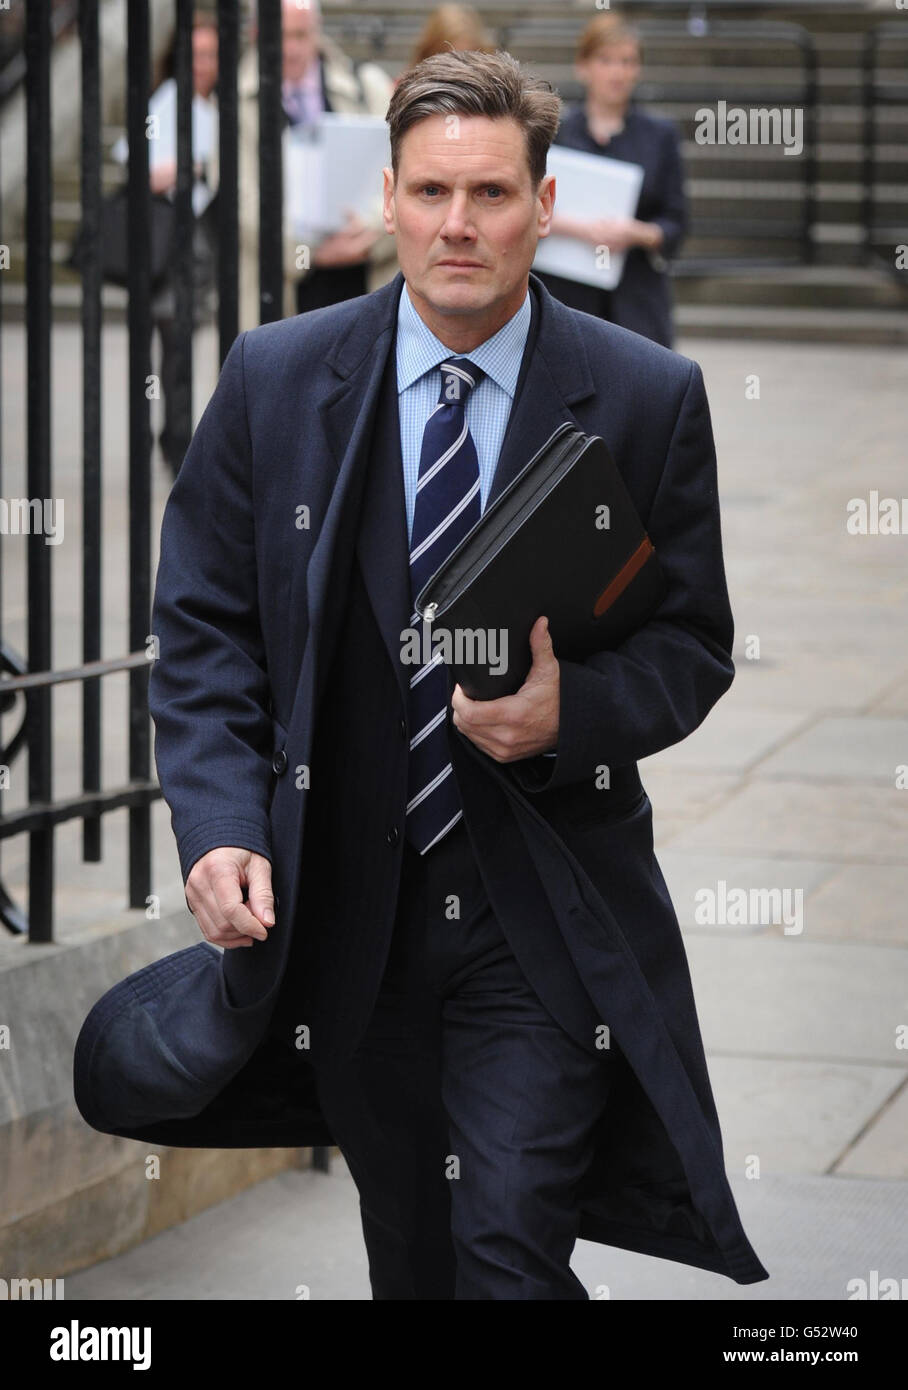 Director of Public Prosecutions Keir Starmer leaves the High Court in London after giving evidence to the Leveson Inquiry into press standards. Stock Photo